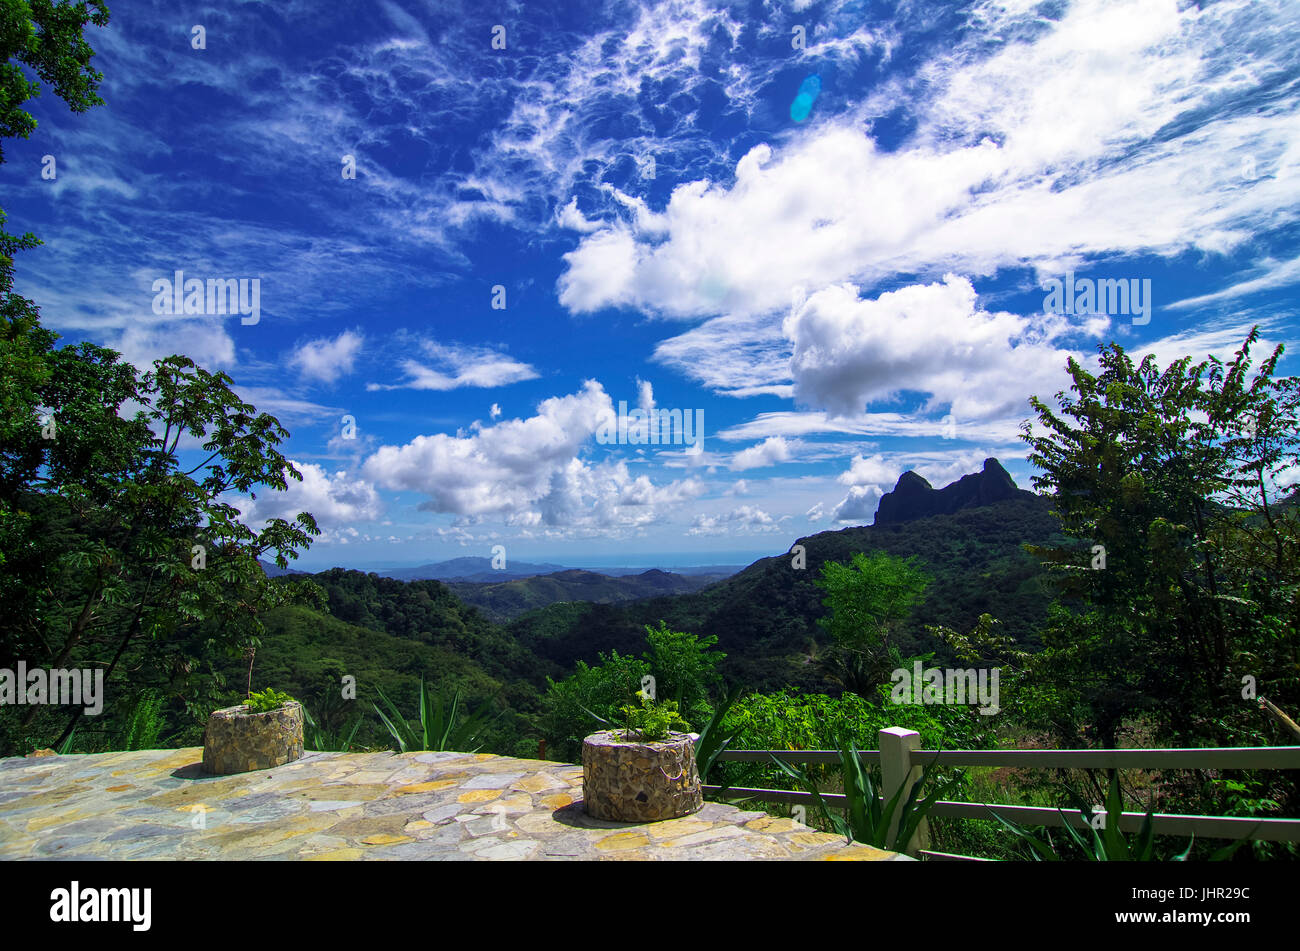 Landscape images taken in the mountains of Panama in Altos del Maria Stock Photo